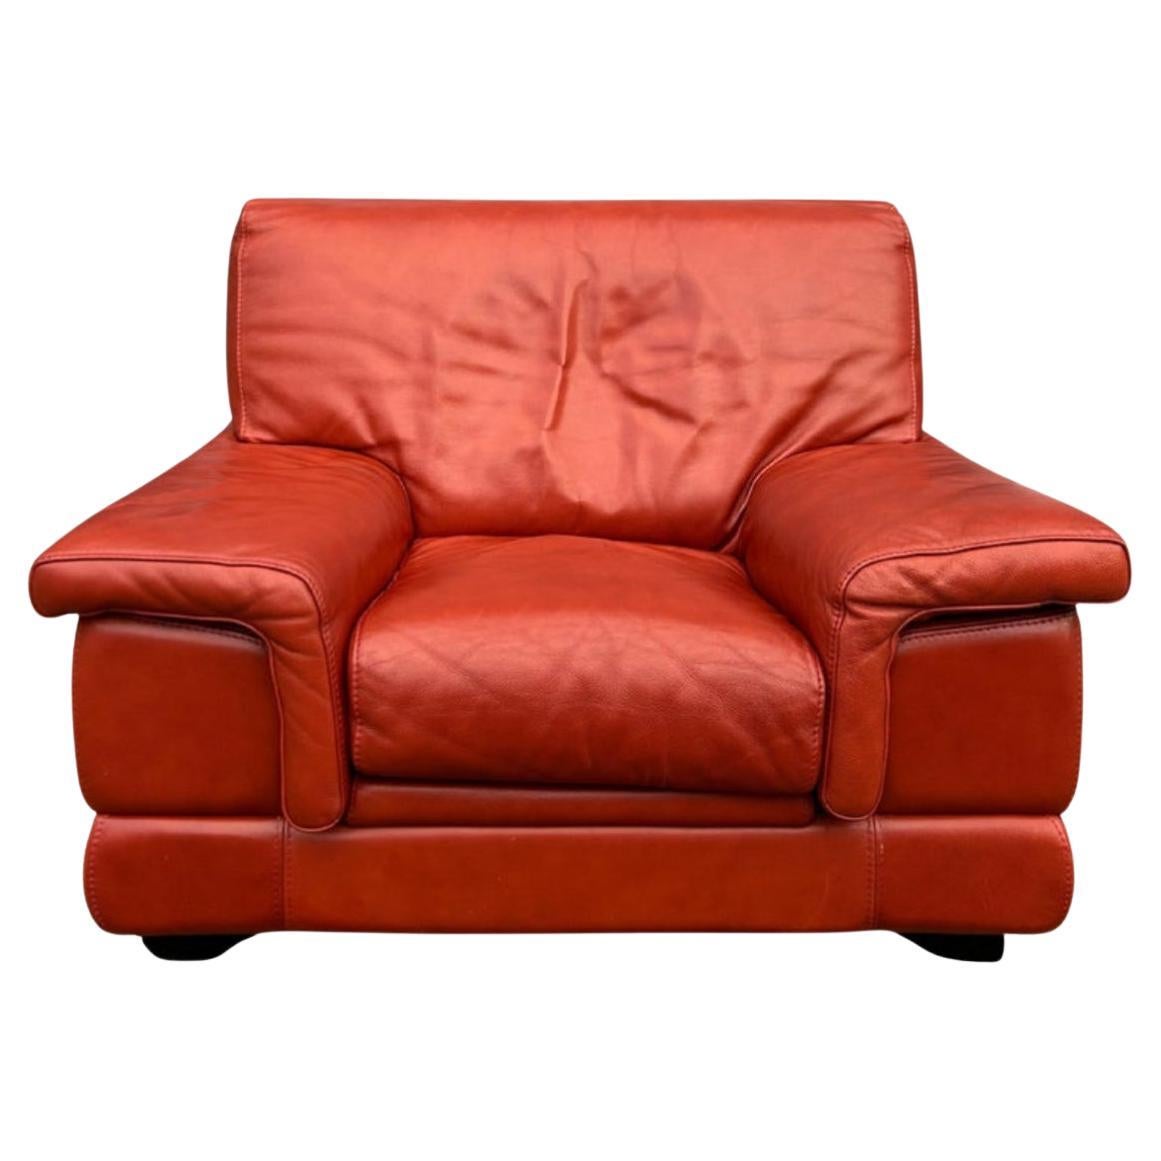 Beautiful Mid Century Italian Burnt Sienna Red Leather 3 seat Sofa and matching chair by Roche Bobois. Wonderful condition very clean - ready for use. Clean soft thick leather. Great Design - Labeled under cushions and Dust cover. Located in